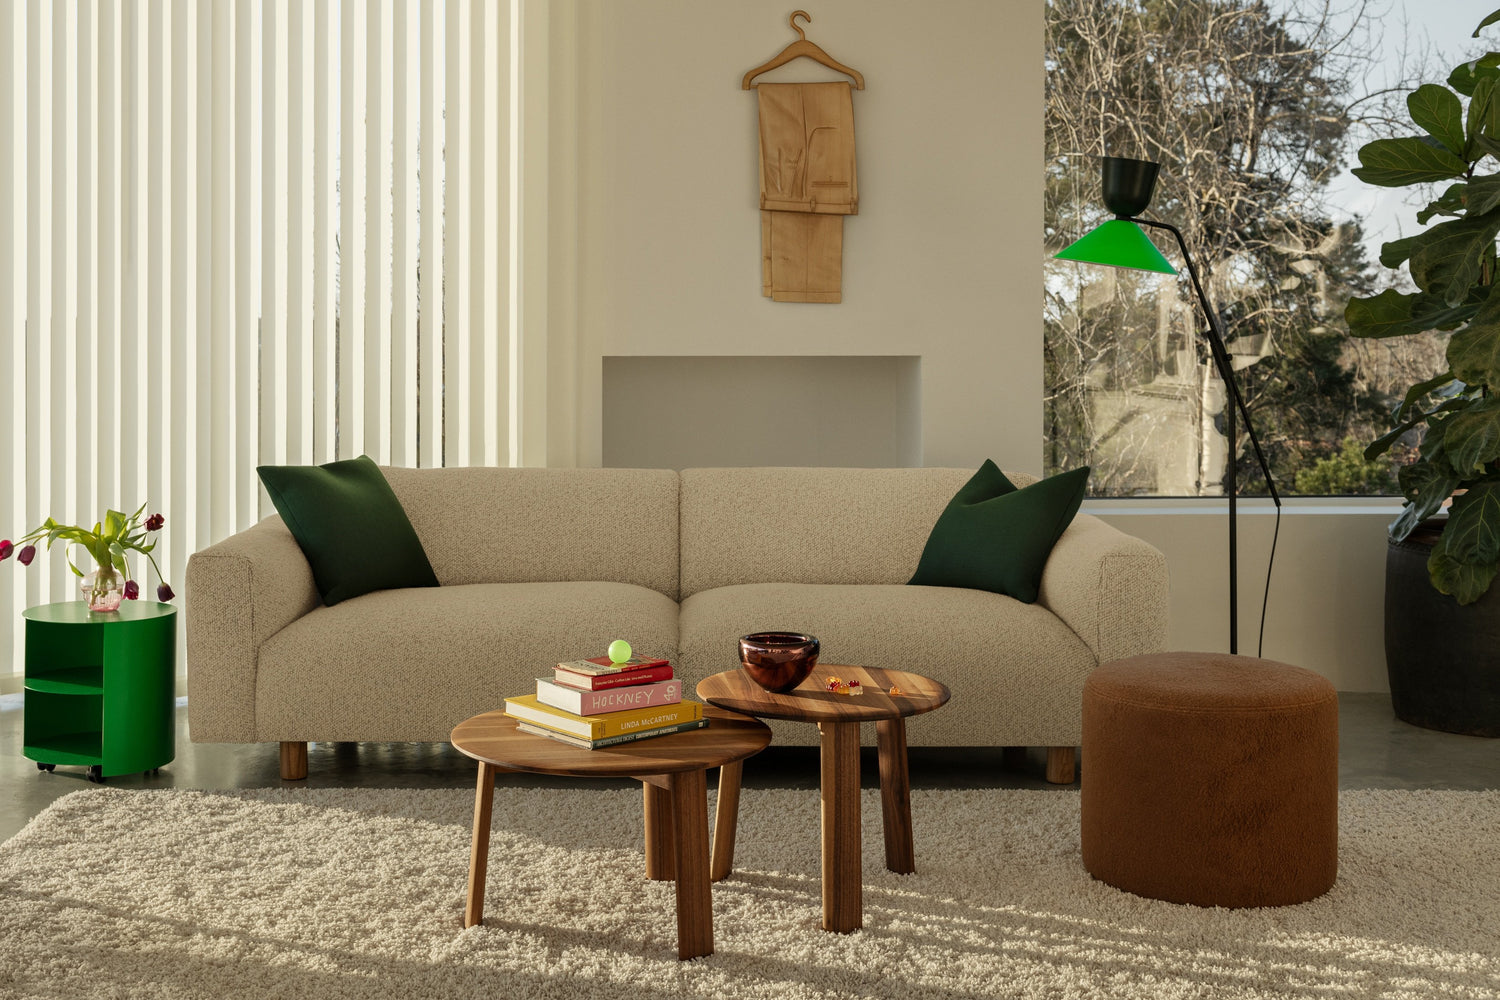 A living room scene featuring a Pure Green Hide Side Table, Alle Coffee Tables (set of 2) in Walnut, A Brown Bon Pouf Round, an Alphabeta Floor Lamp, and a Koti Sofa in the shade Eggshell.